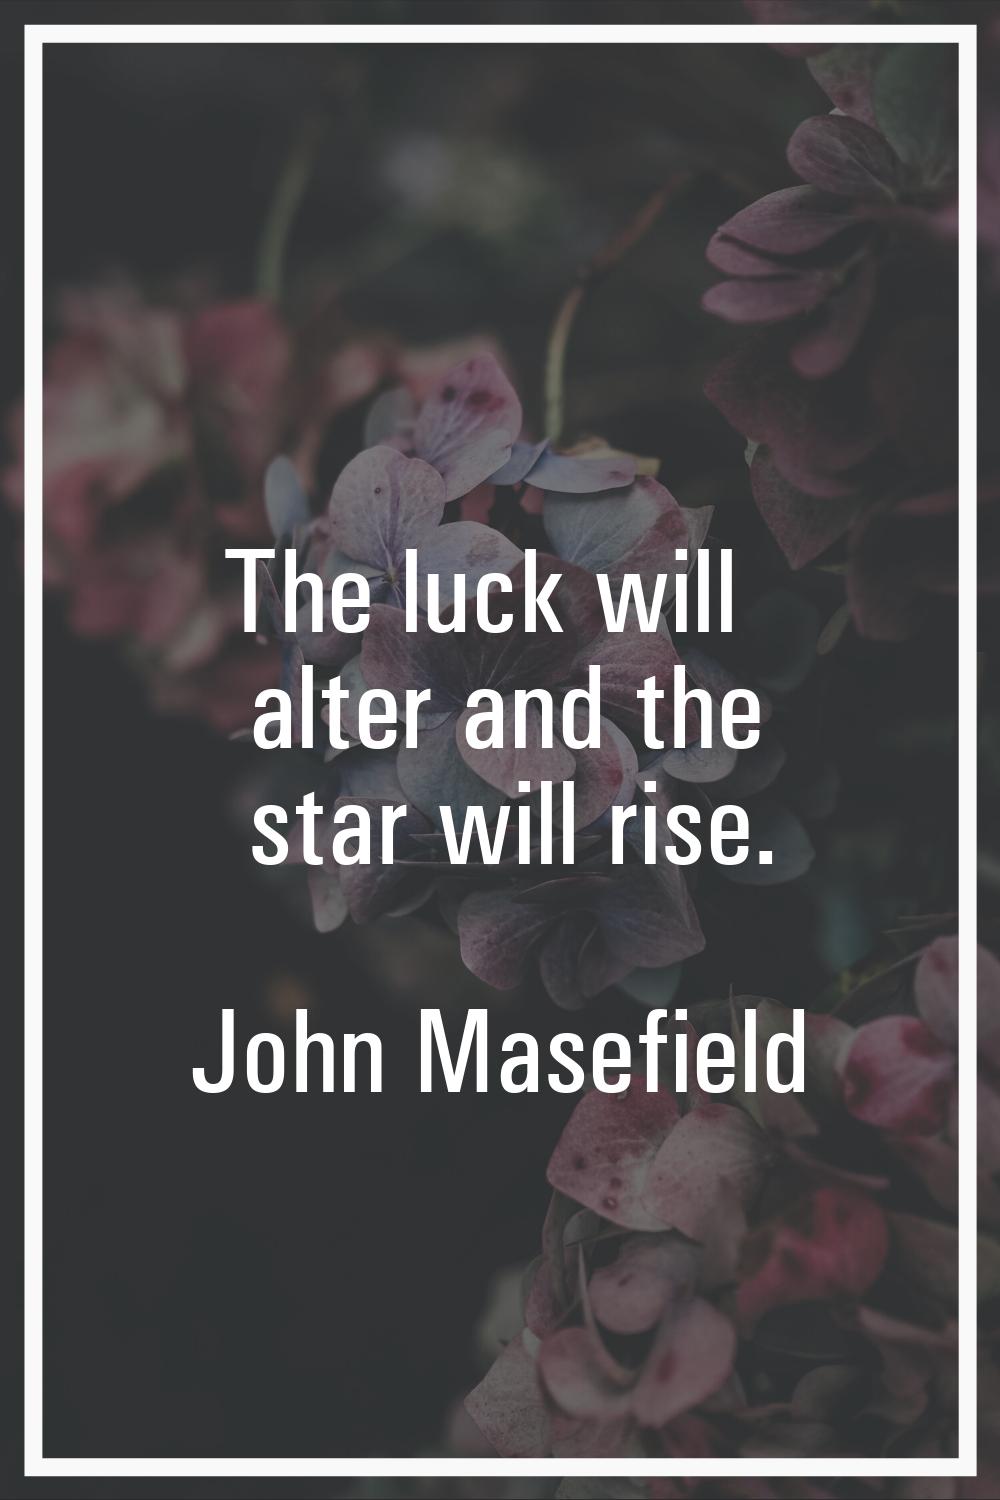 The luck will alter and the star will rise.